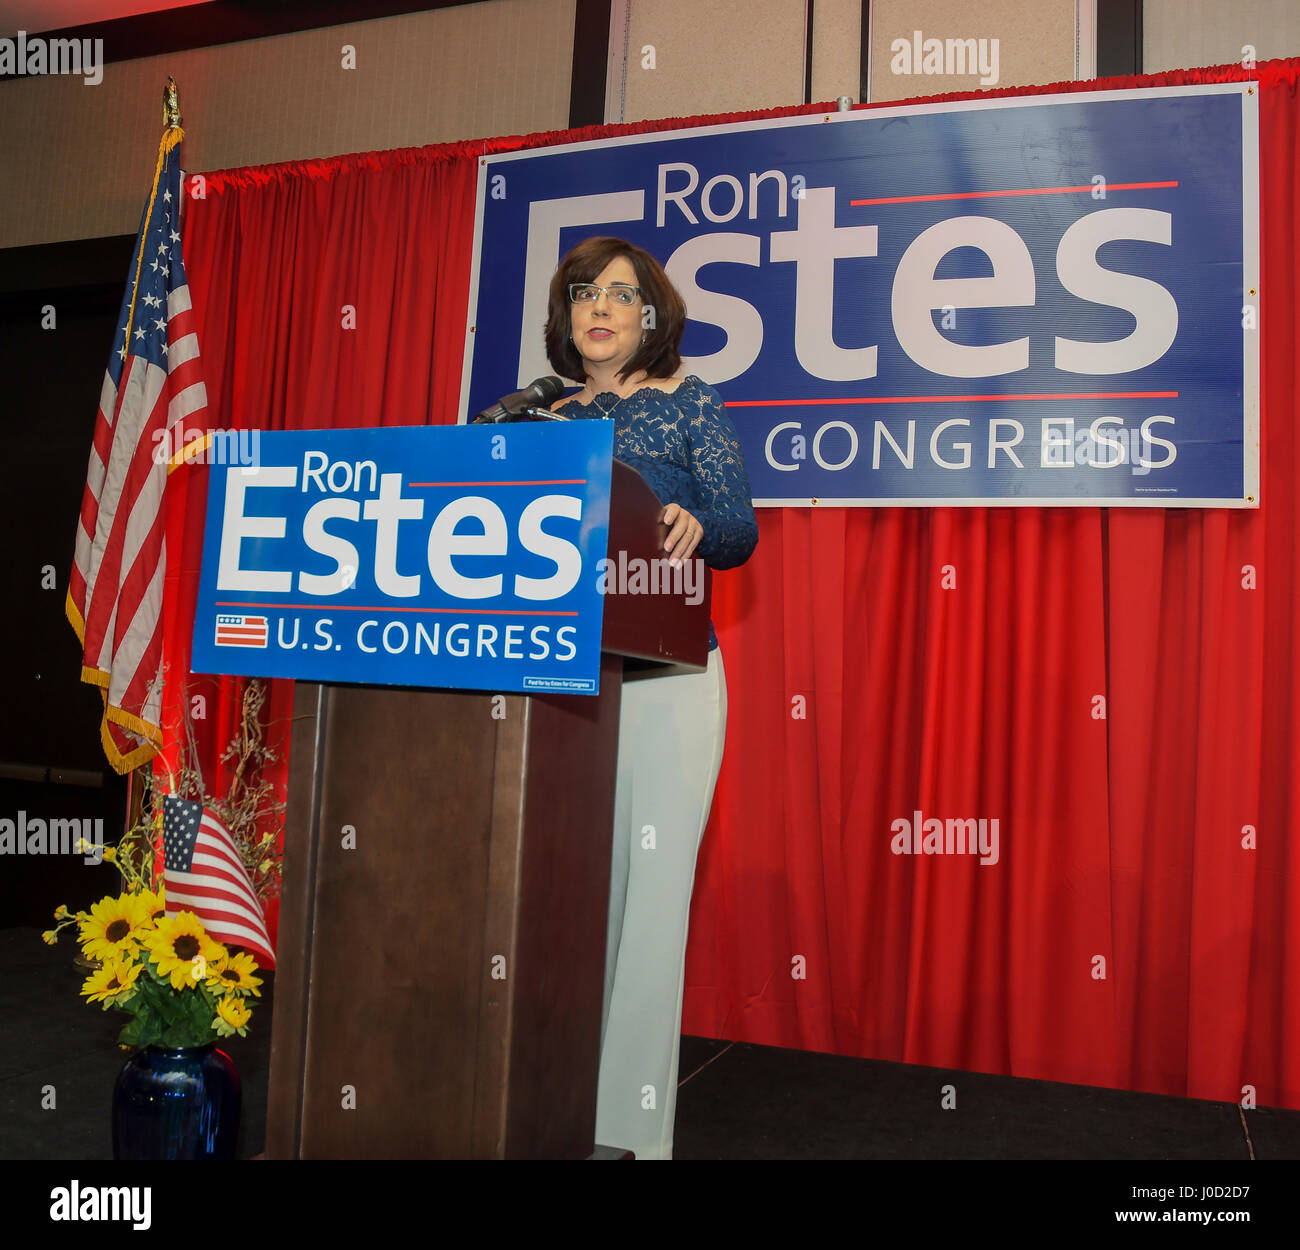 Wichita, U.S. 11th Apr, 2017. Susan Estes introduces her husband Ron to the crowd of supporters at the victory celebration after his win of the special election, Wichita Kansas, April 11, 2017. Credit: mark reinstein/Alamy Live News Stock Photo